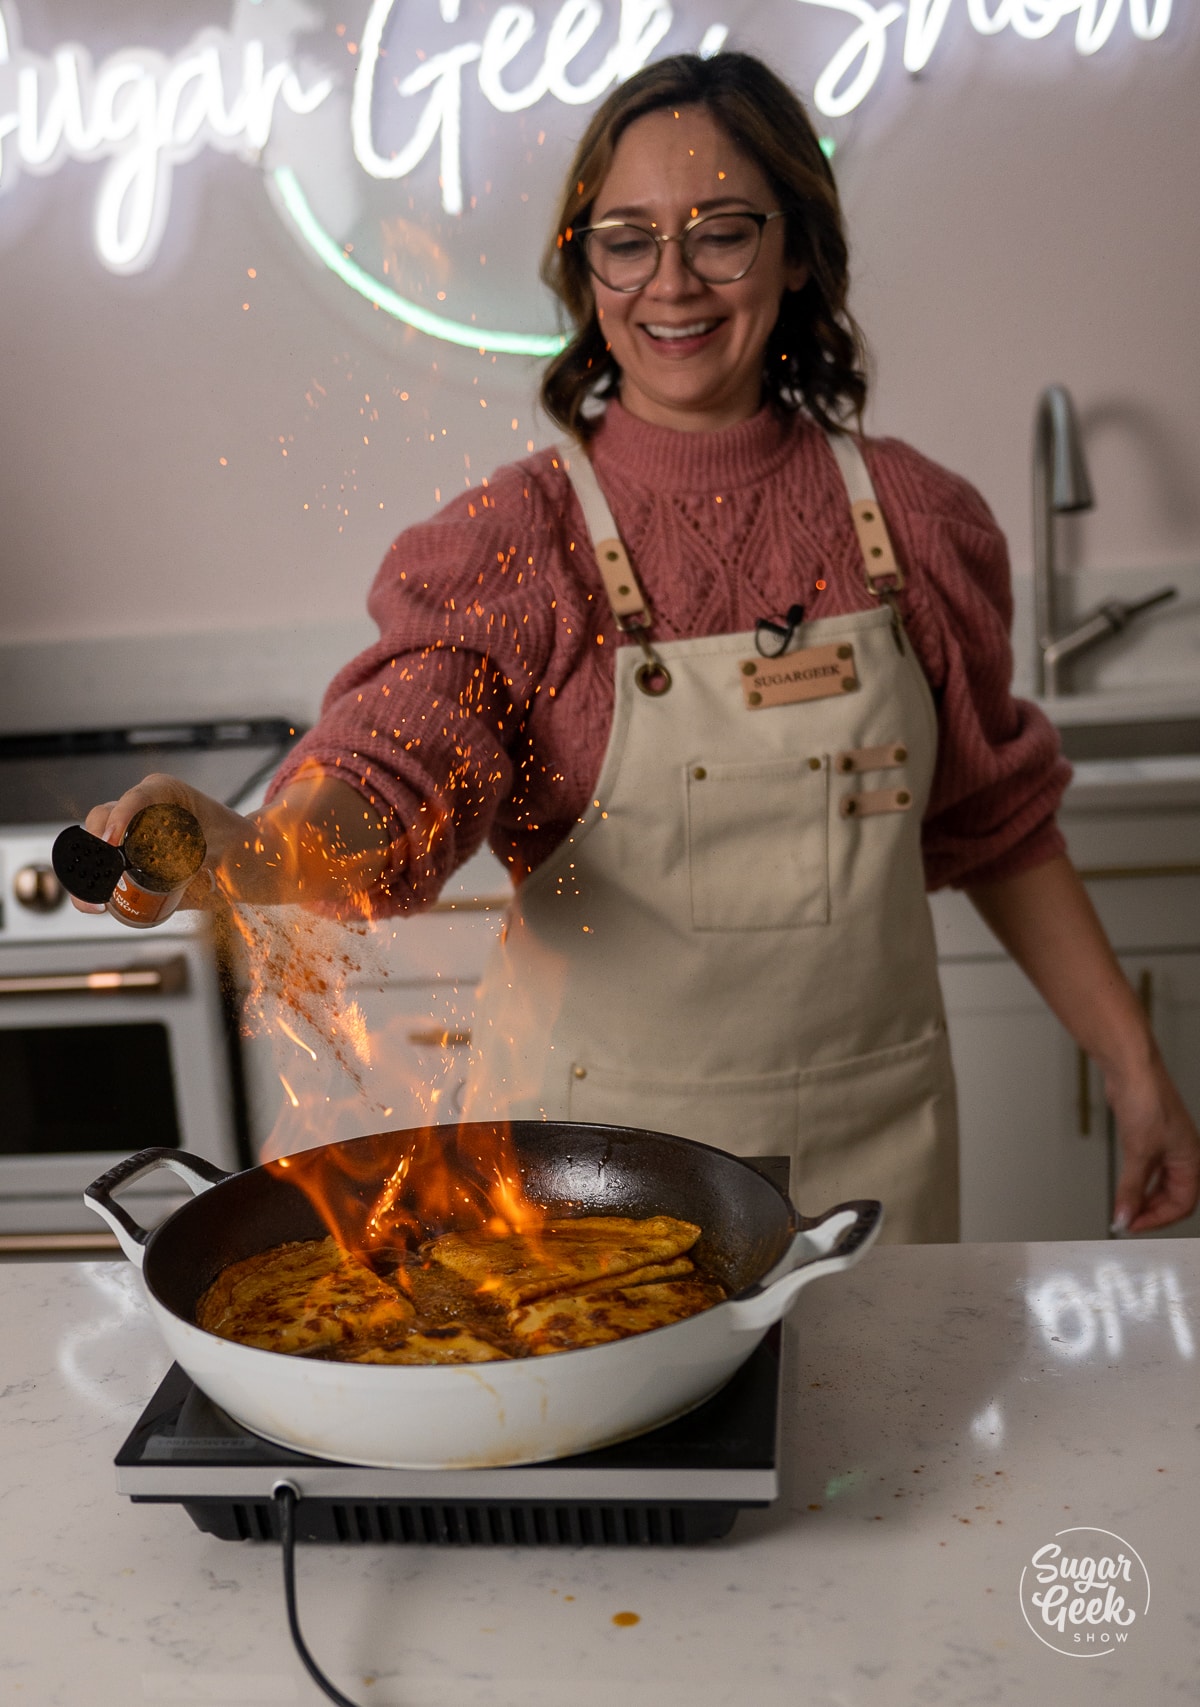 sprinkling cinnamon into fire over a pan of crepe suzette